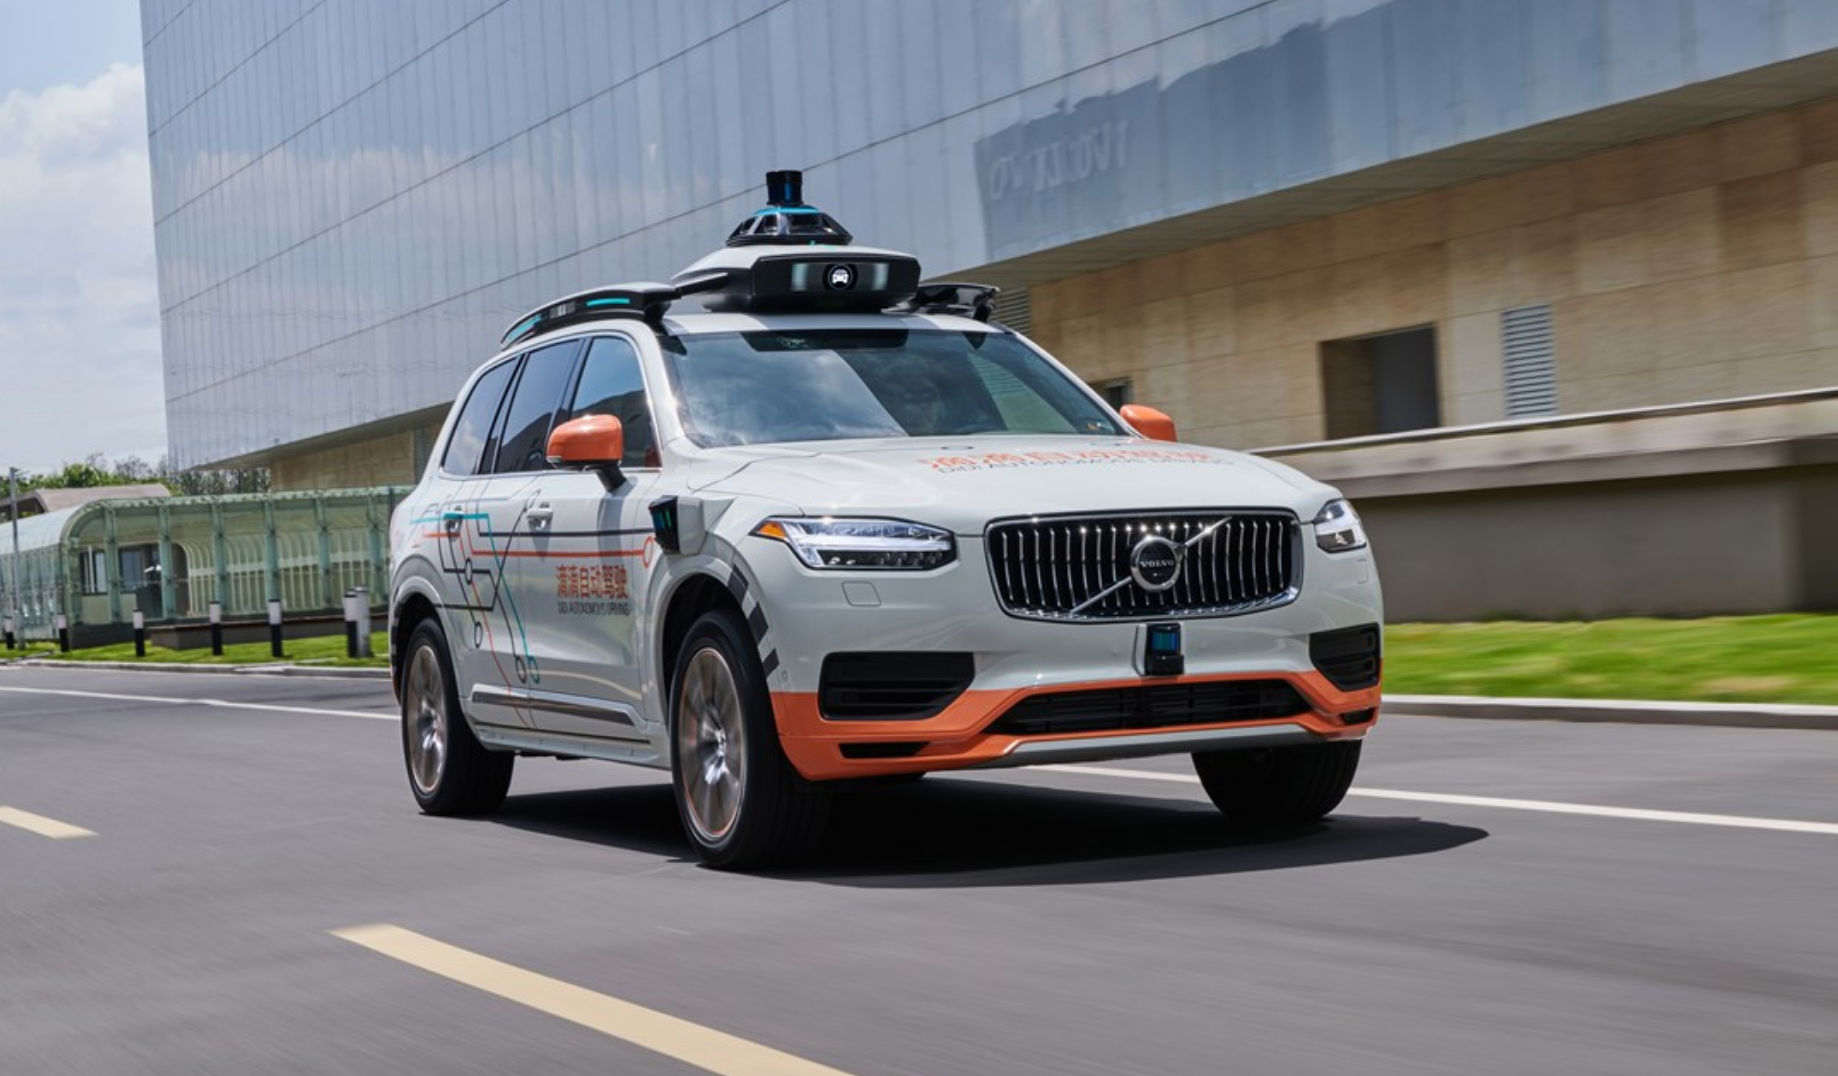 Volvo and DiDi to collaborate on autonomous driving